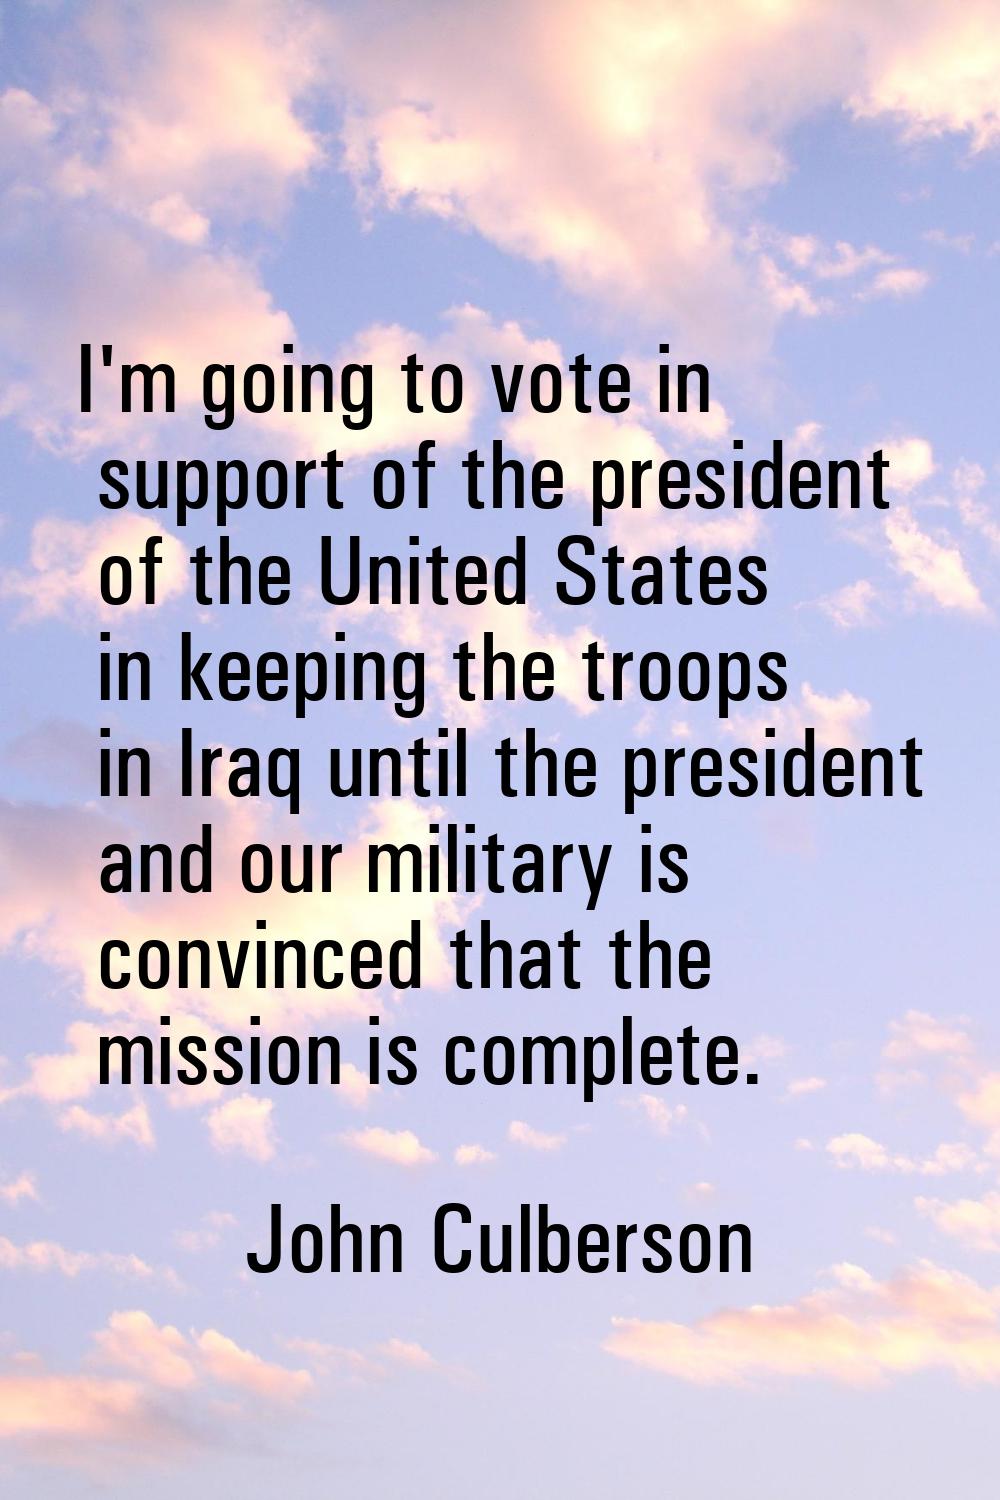 I'm going to vote in support of the president of the United States in keeping the troops in Iraq un